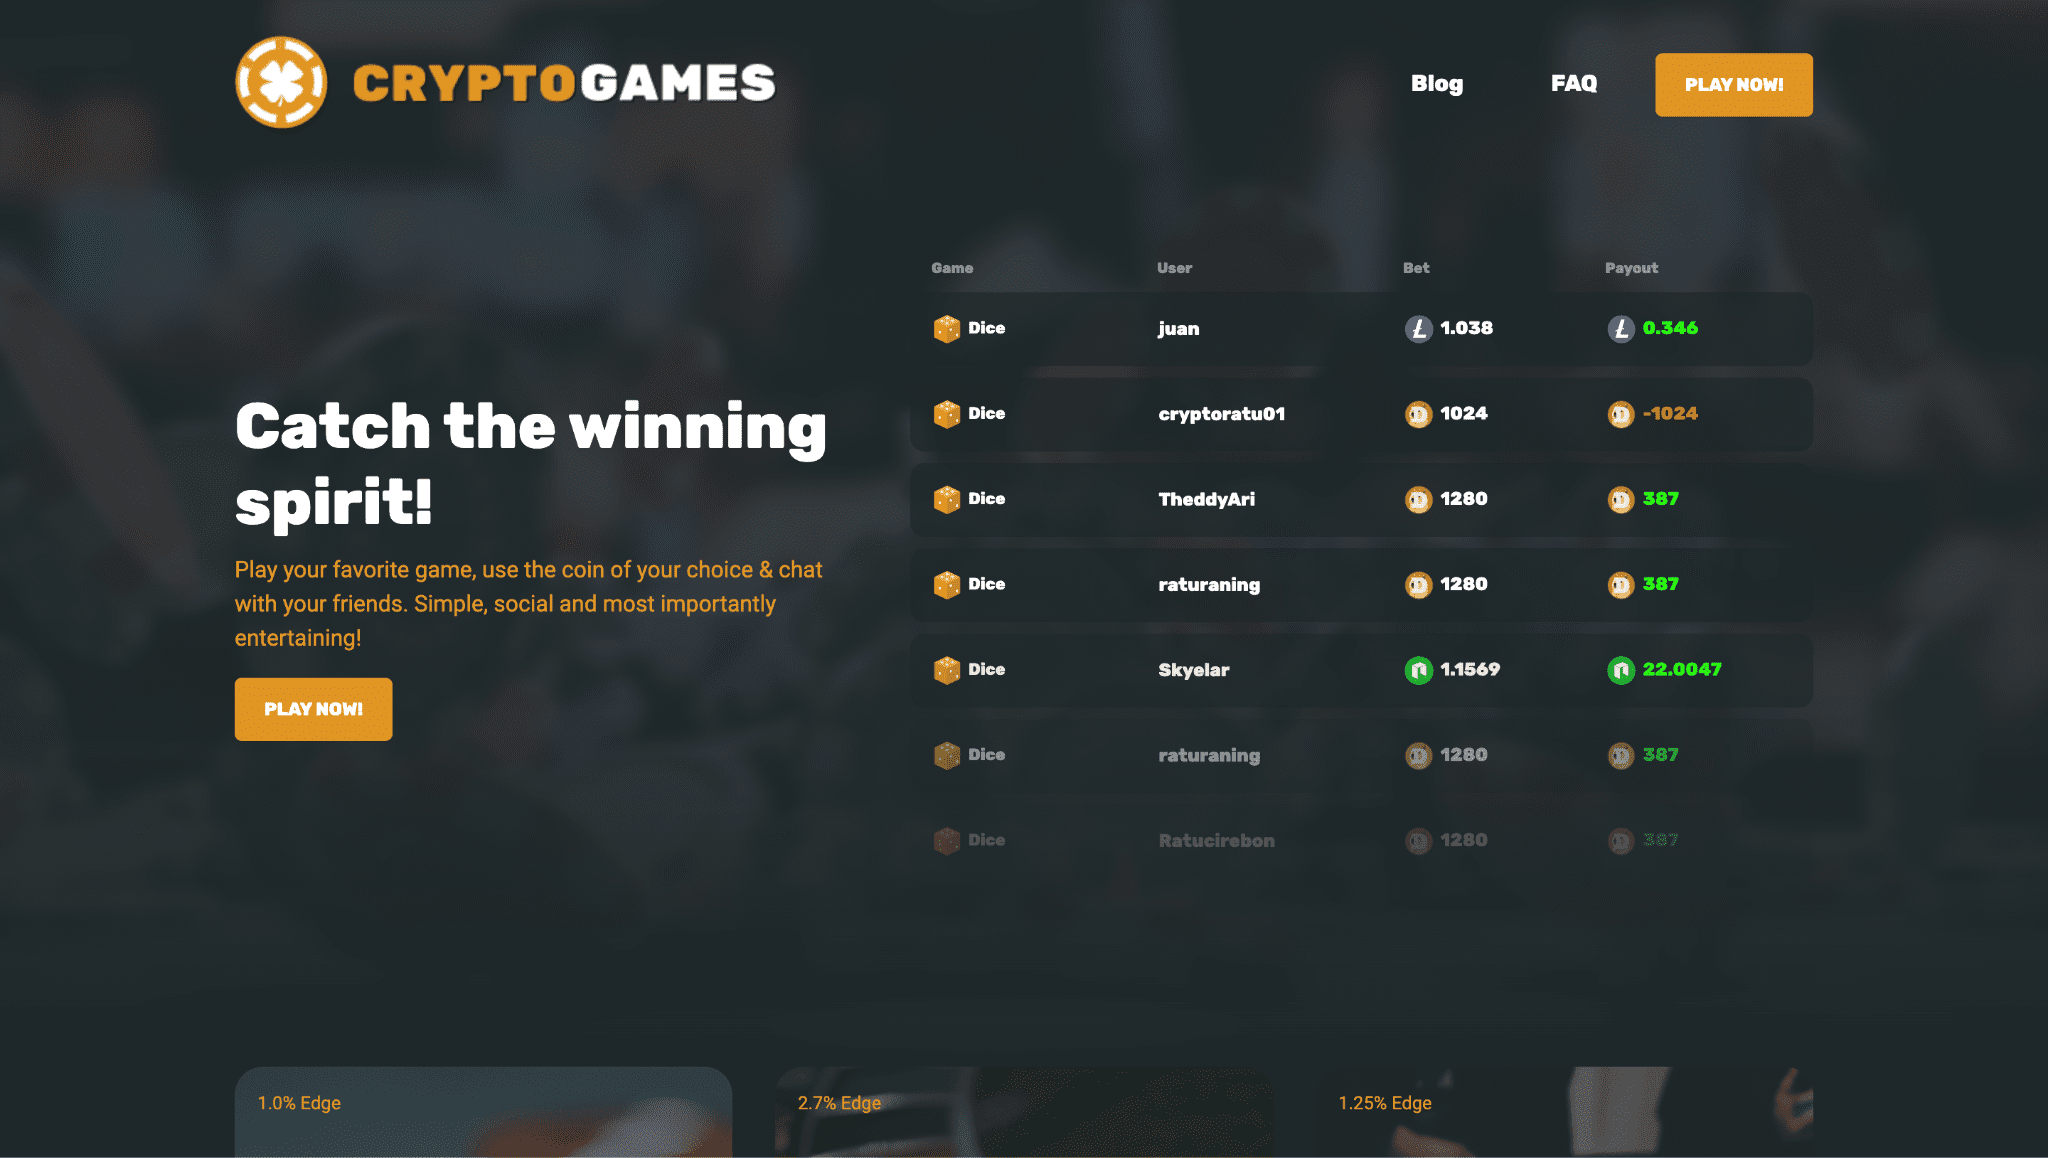 Screenshot of Cryptogames landing page